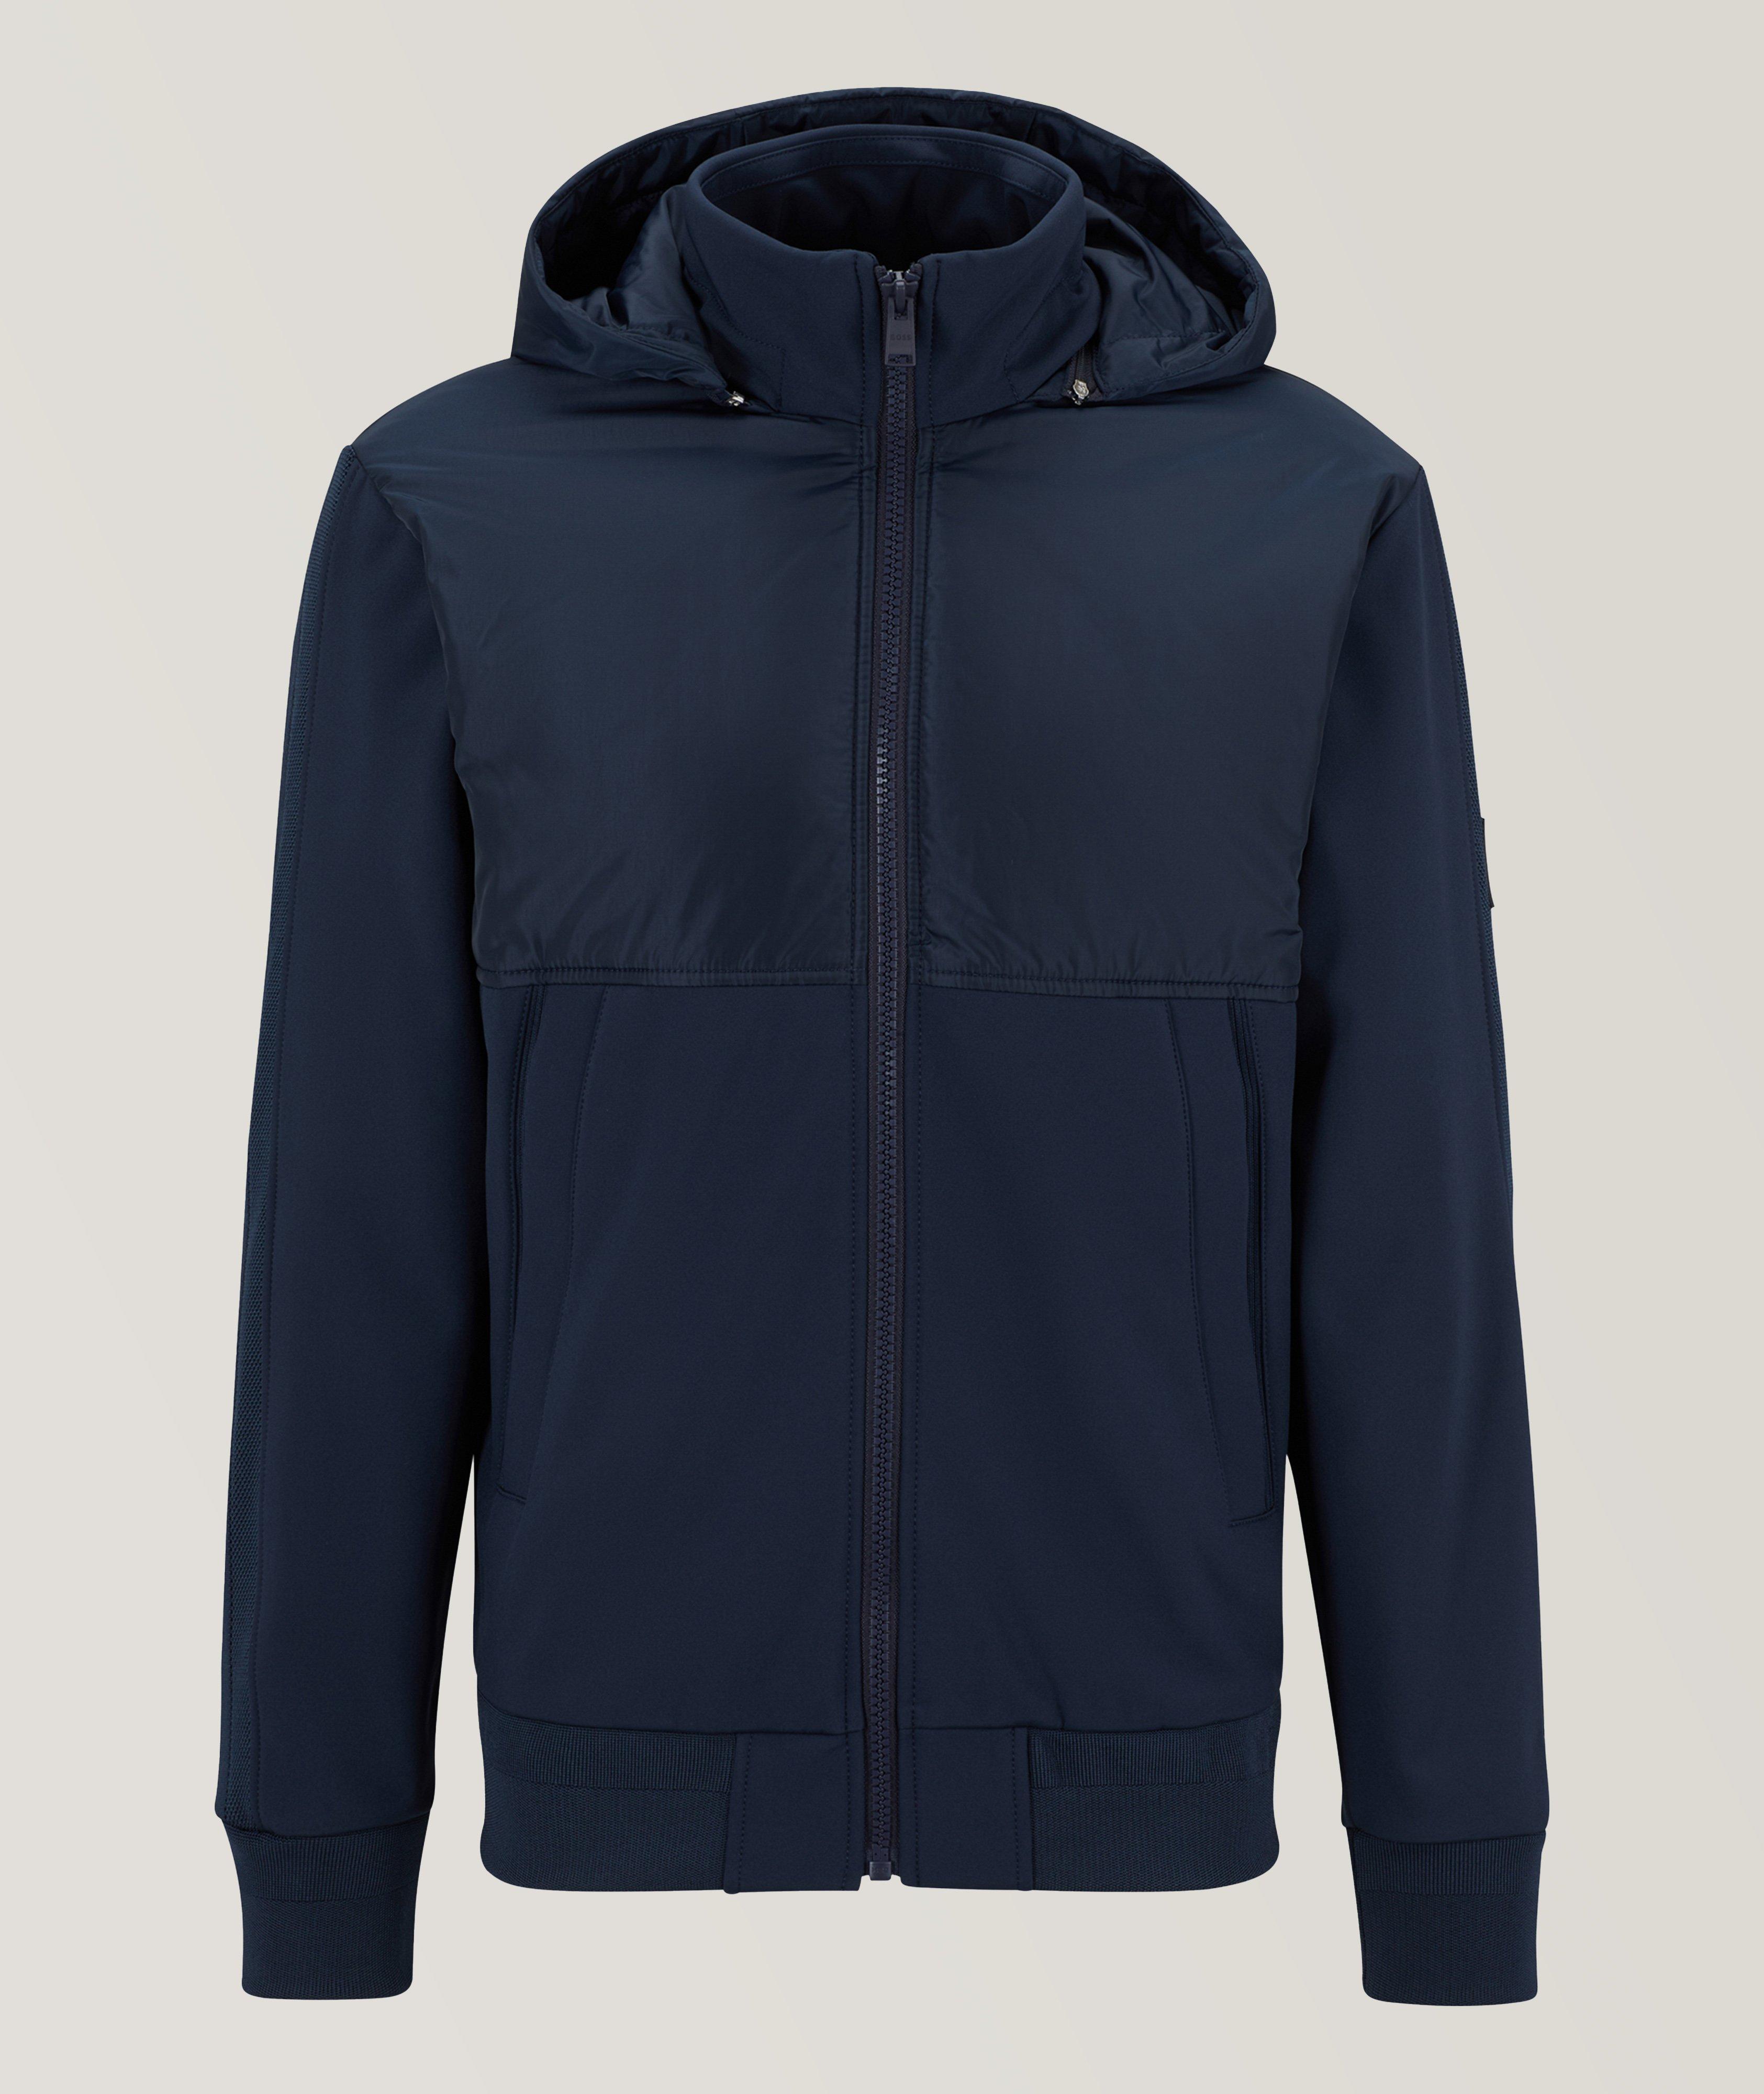 Seeger Cotton-Blend Technical Hooded Zip-Up Sweater image 0